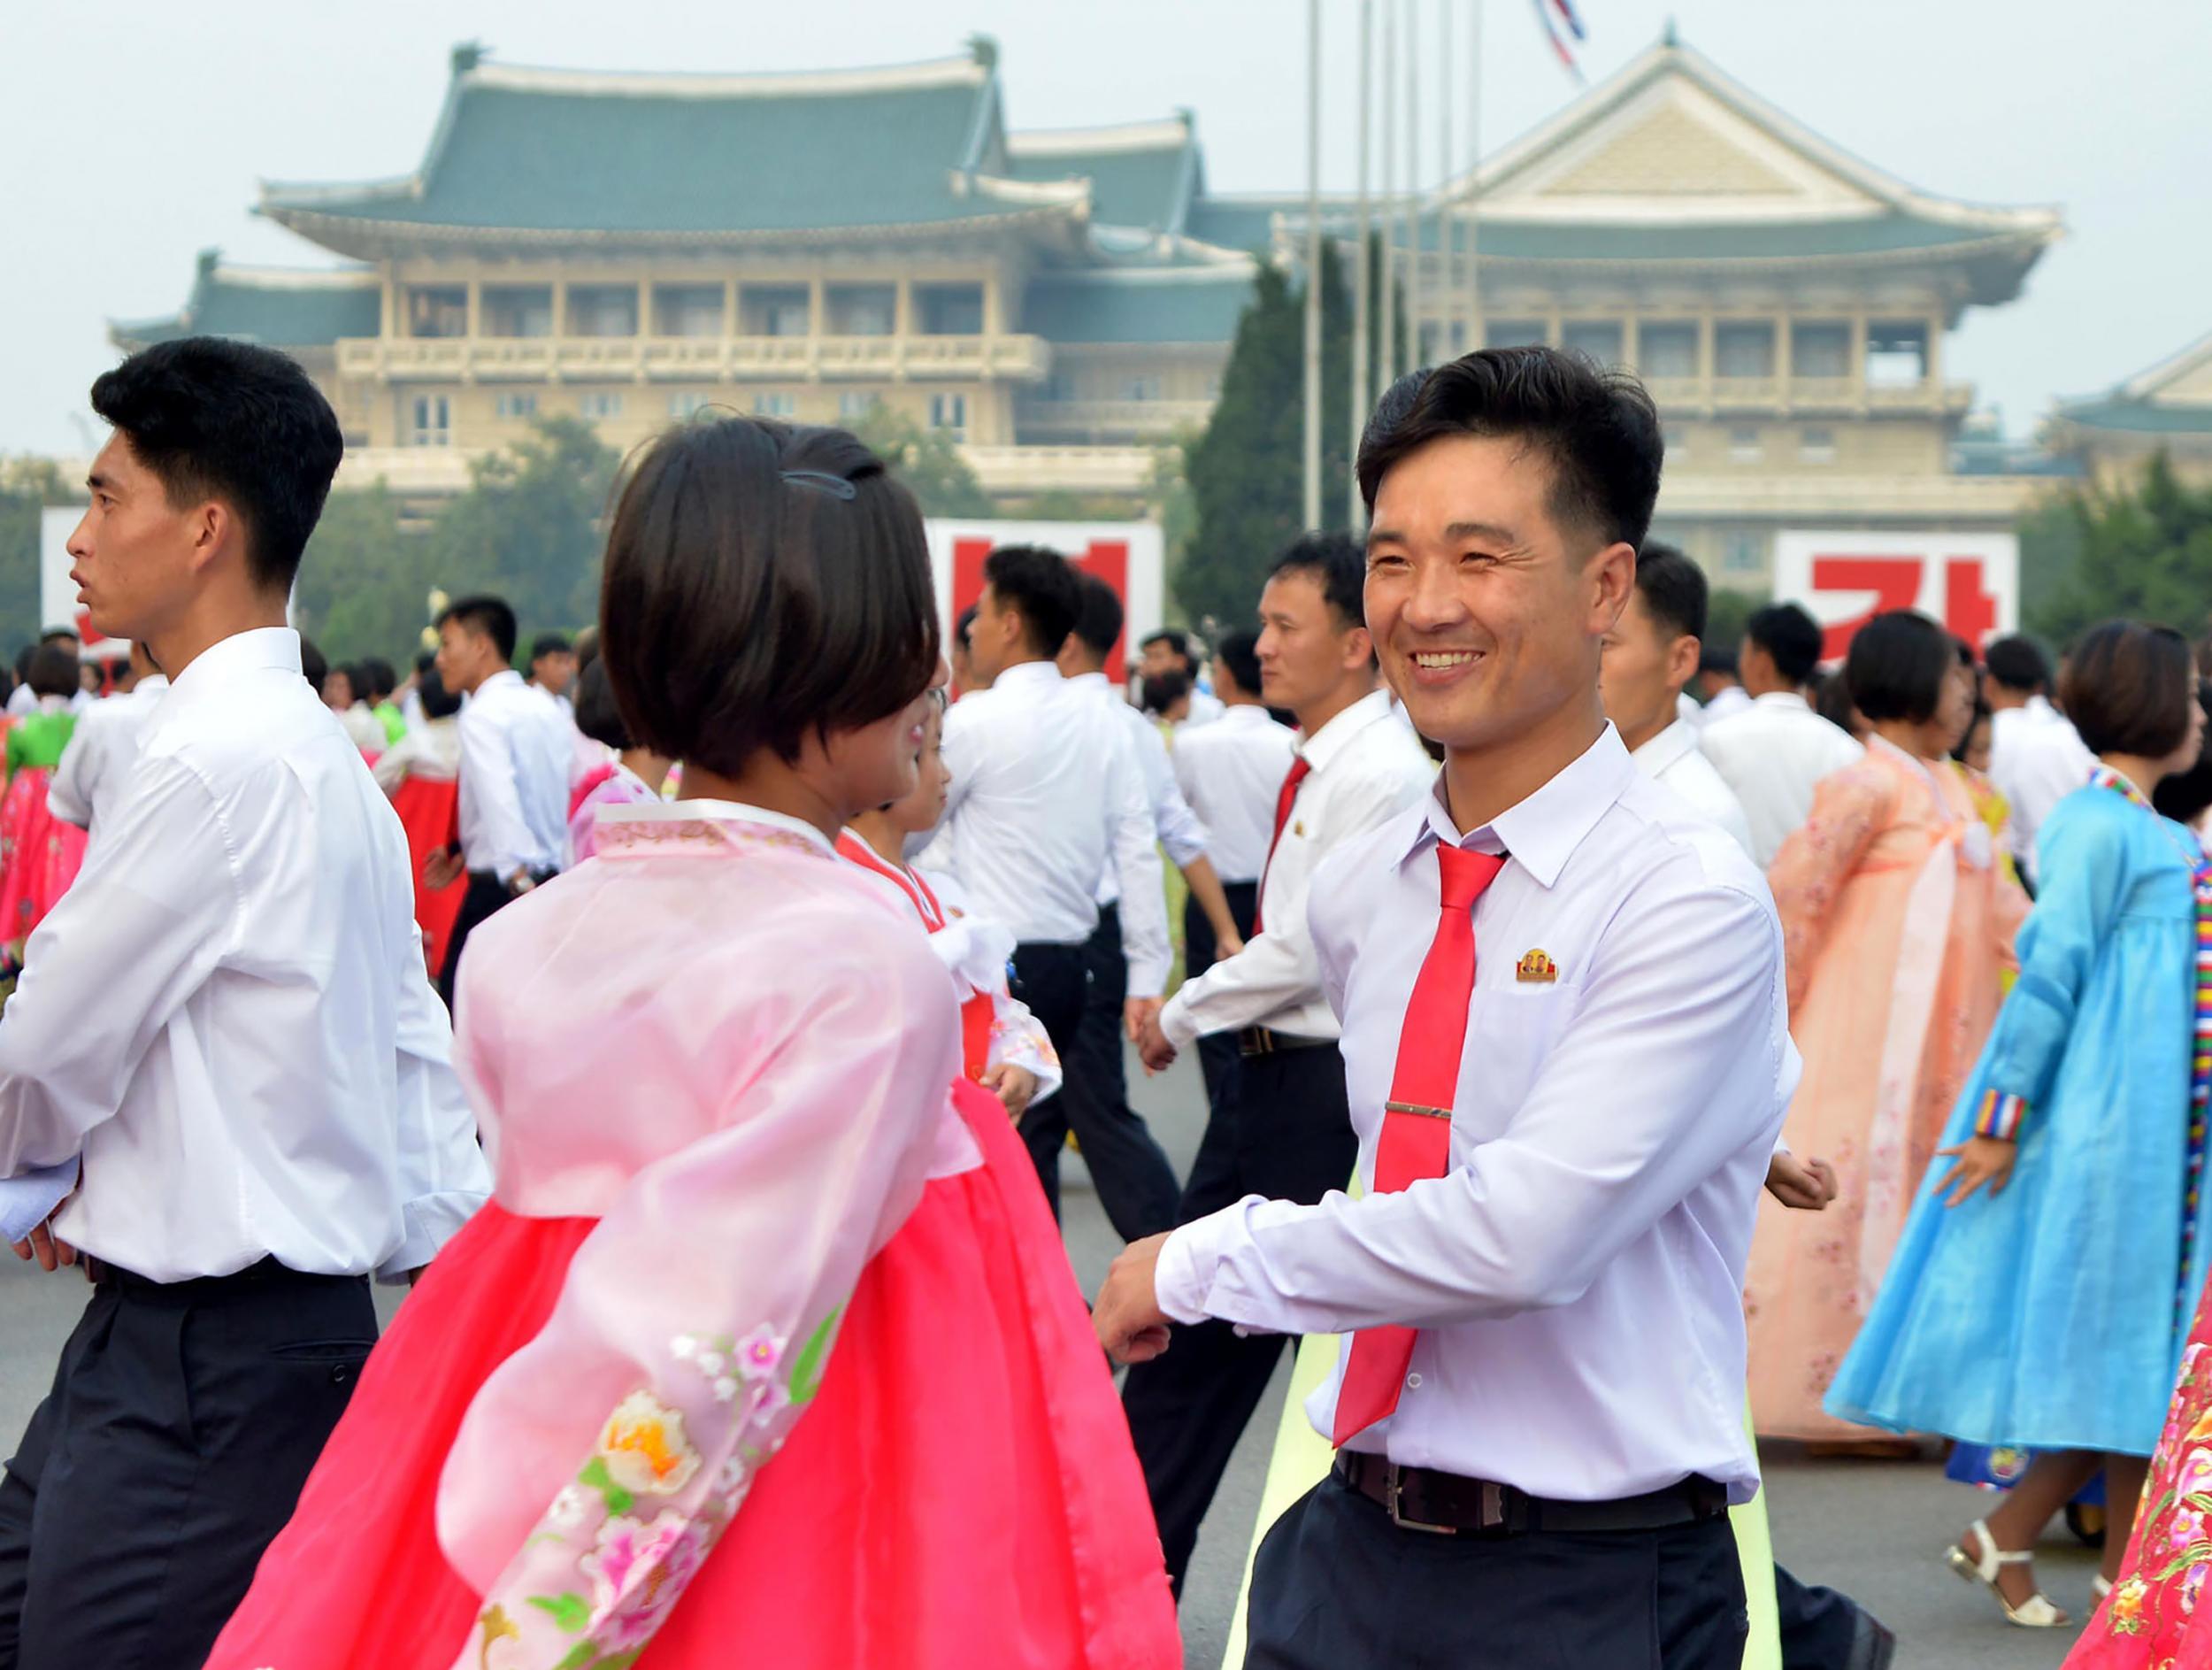 North Korean youth during a dance party in Pyongyang celebrating the 69th anniversary of North Korea's national day